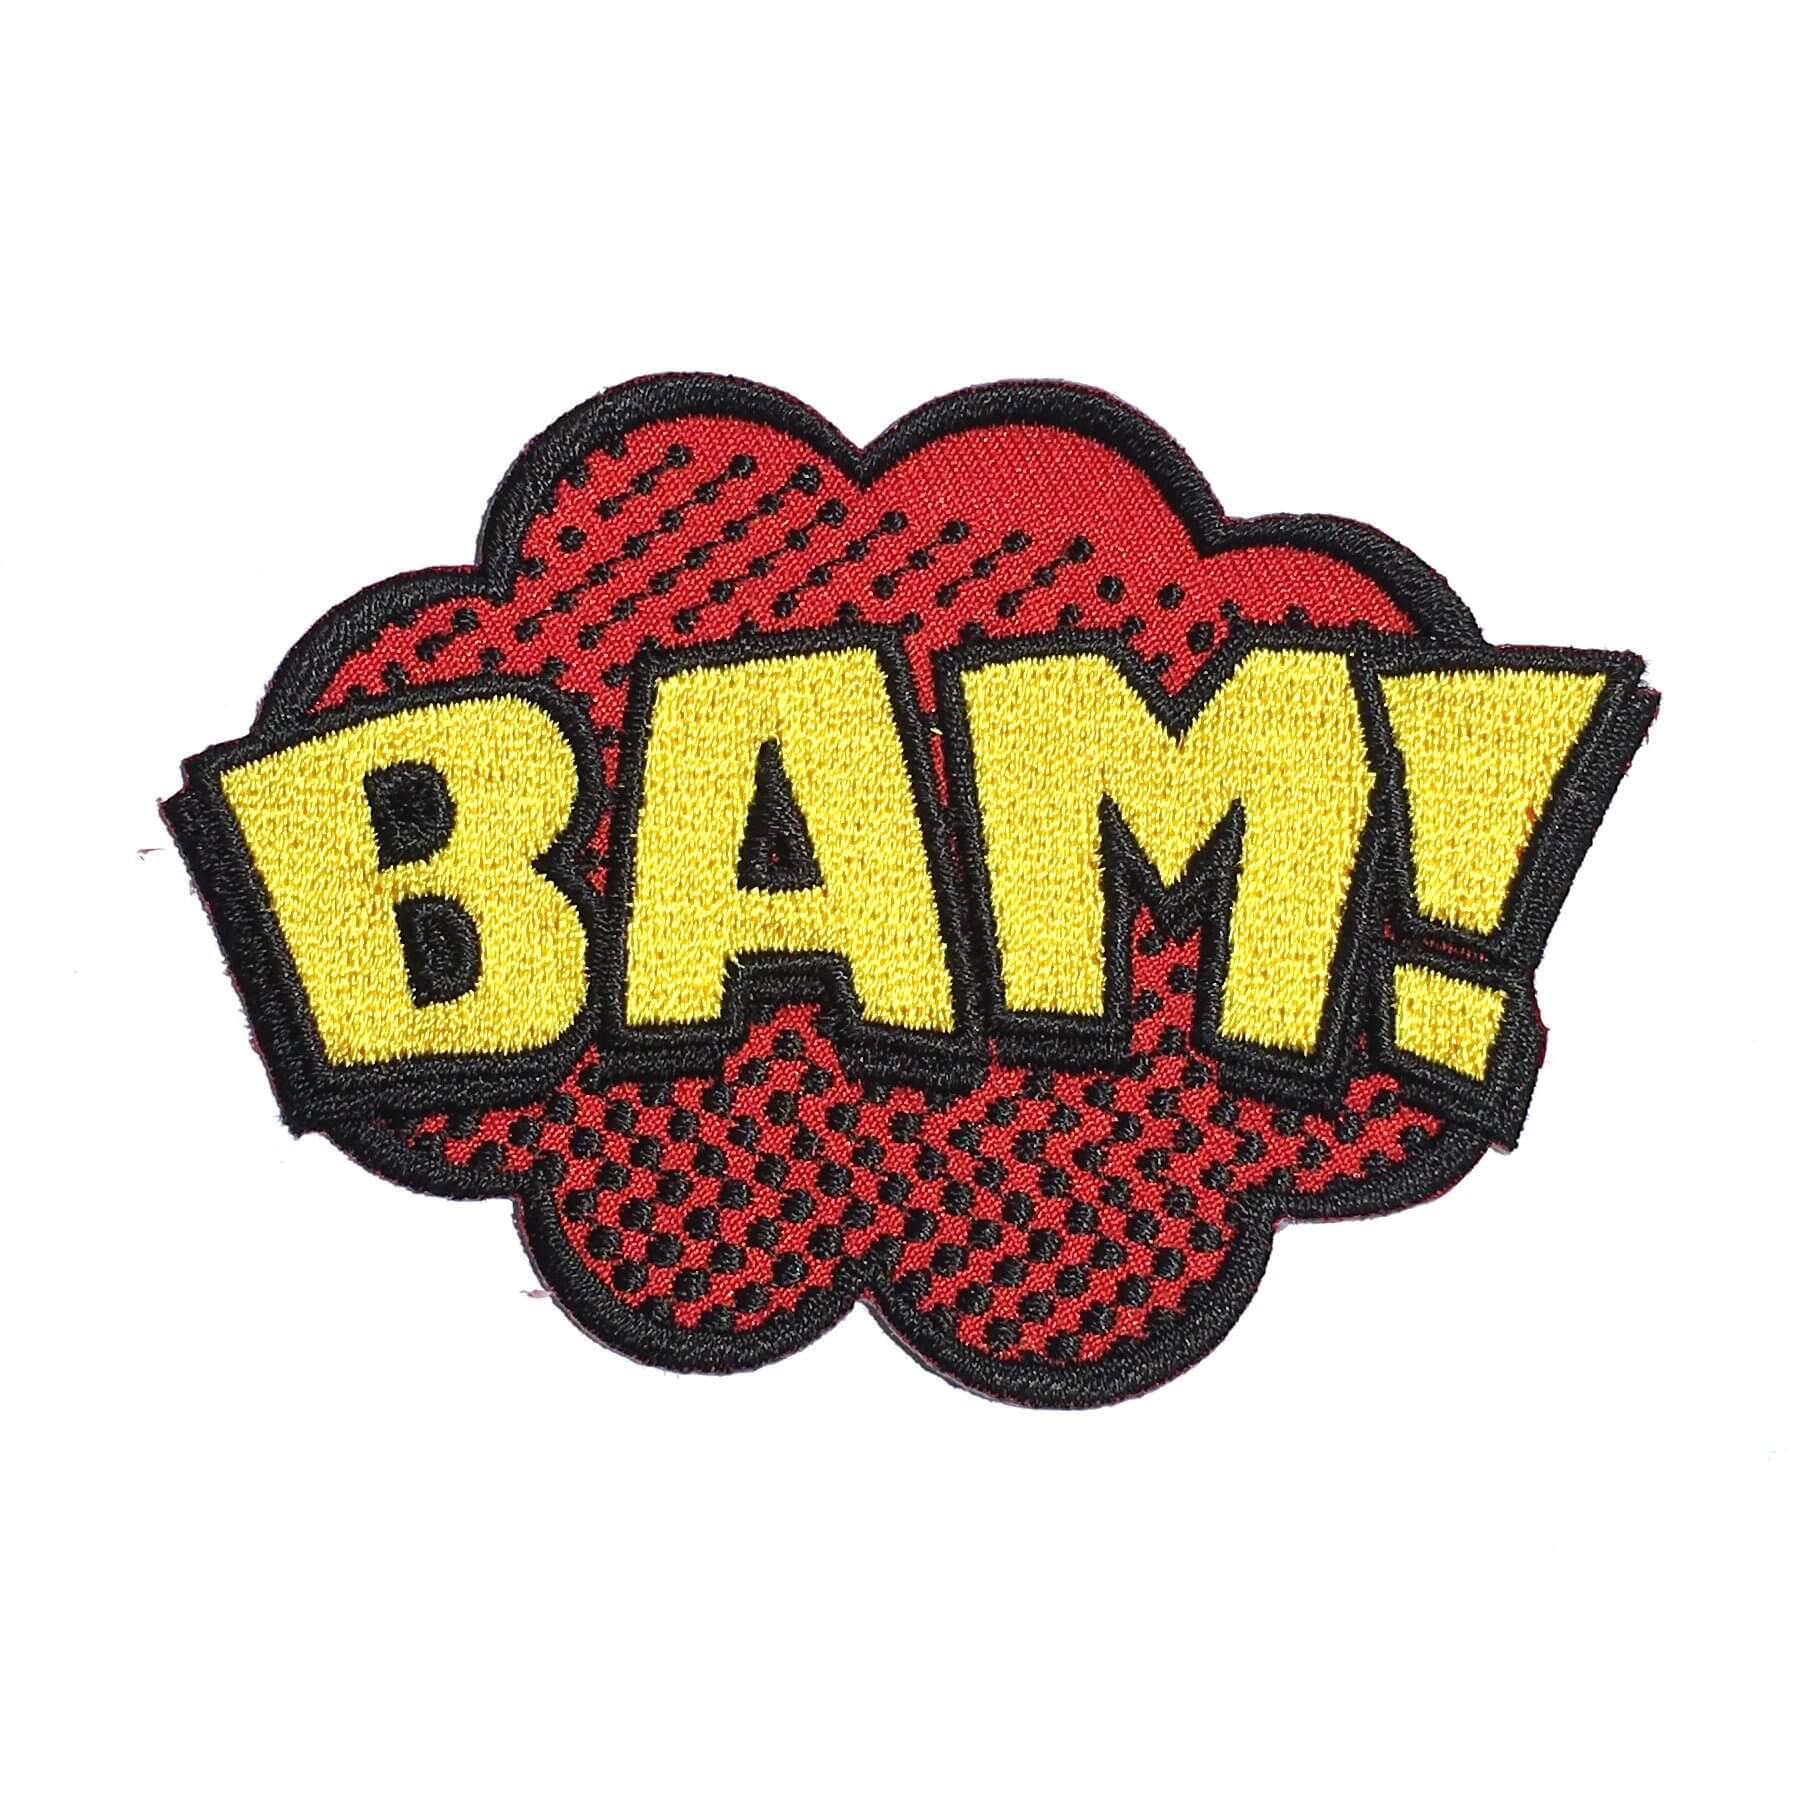 BAM! Comic Book Patch - Unleash Your Inner Superhero Style!